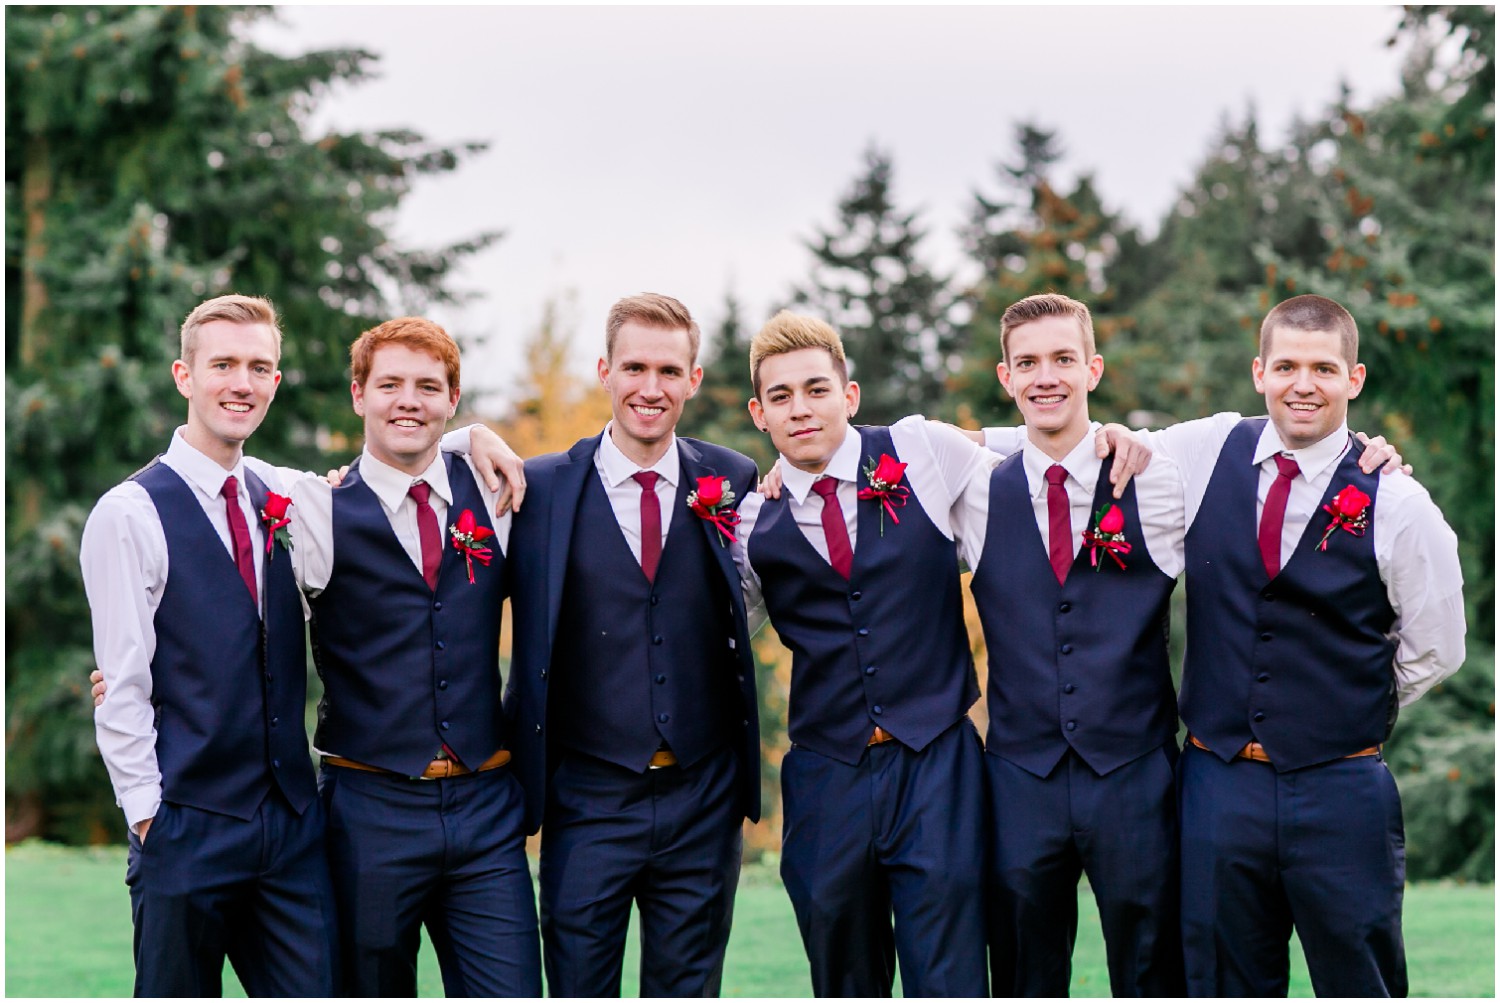 A Colorful Autumn Wedding at the Seattle LDS Temple